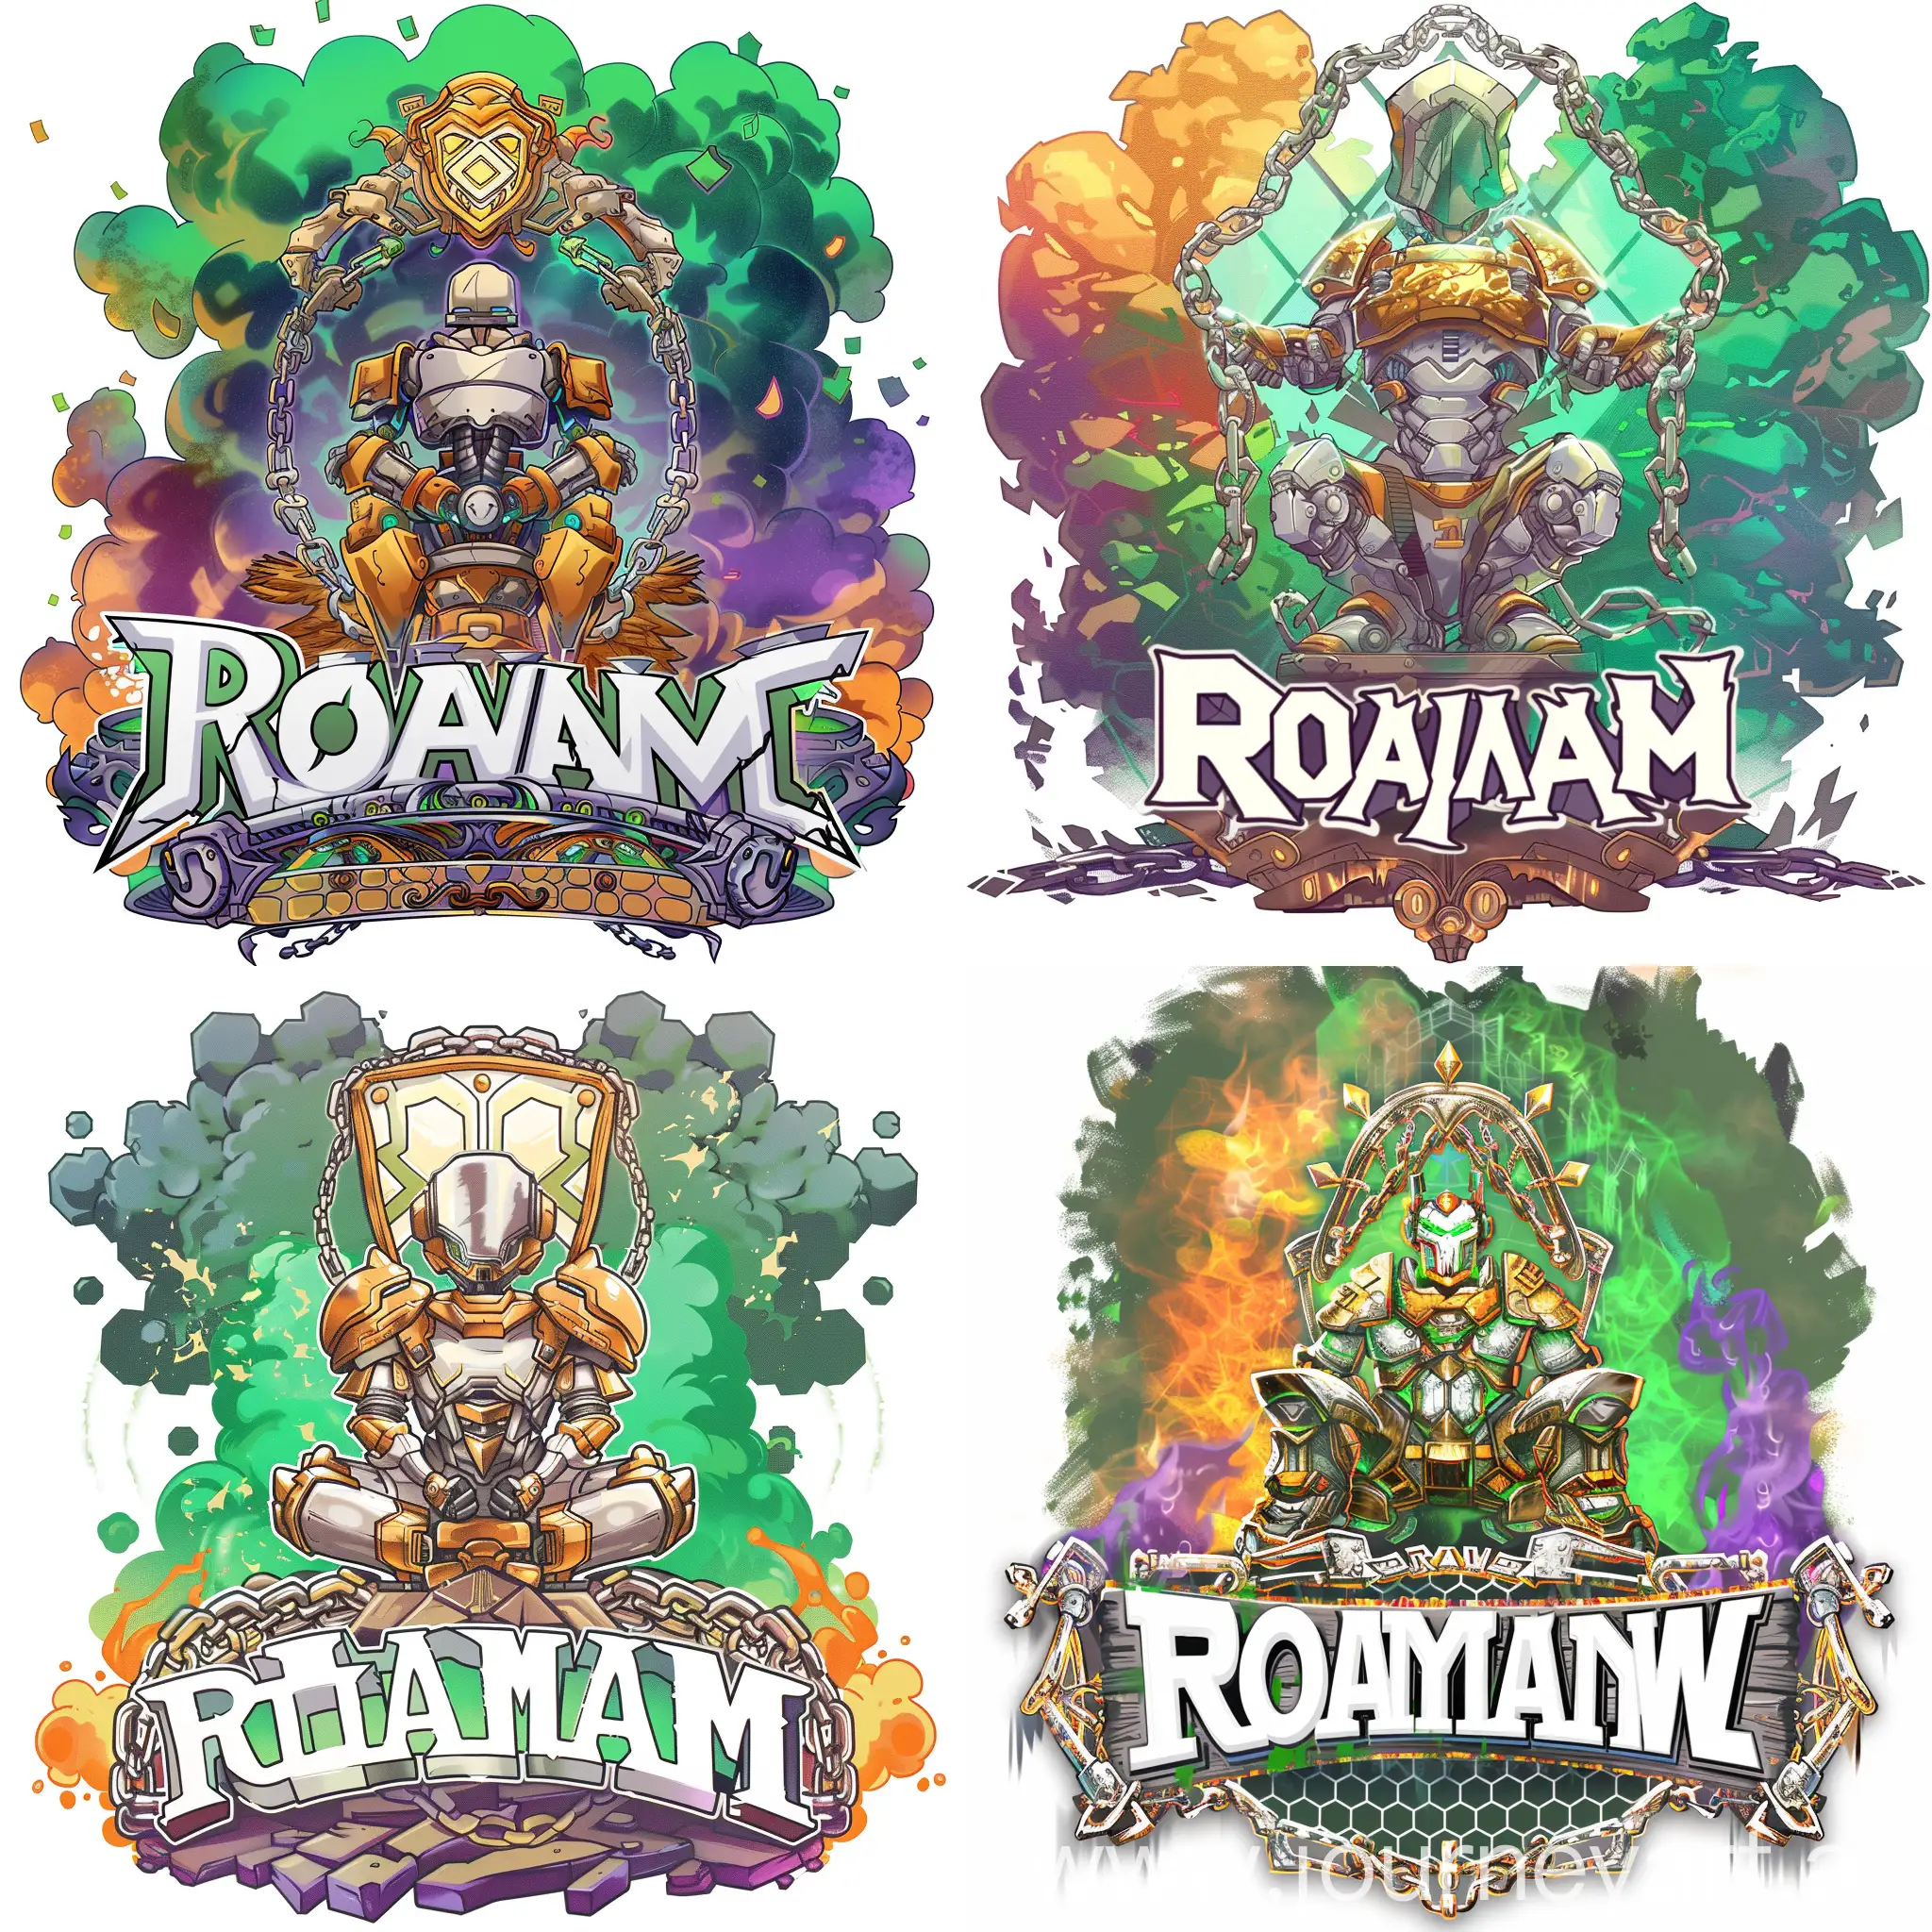 png white background, 2D game logo, in white letters the word "Roamer" is written, the lettering is surrounded by chains, the lettering is in a decorative frame, above the word is a large seated robot, the robot is painted in gold silver and green colors, behind the robot is a shield with a hexagonal cell pattern, the background is a mixture of green, orange and purple smoke, in the style of animated illustrations, text-based --style raw